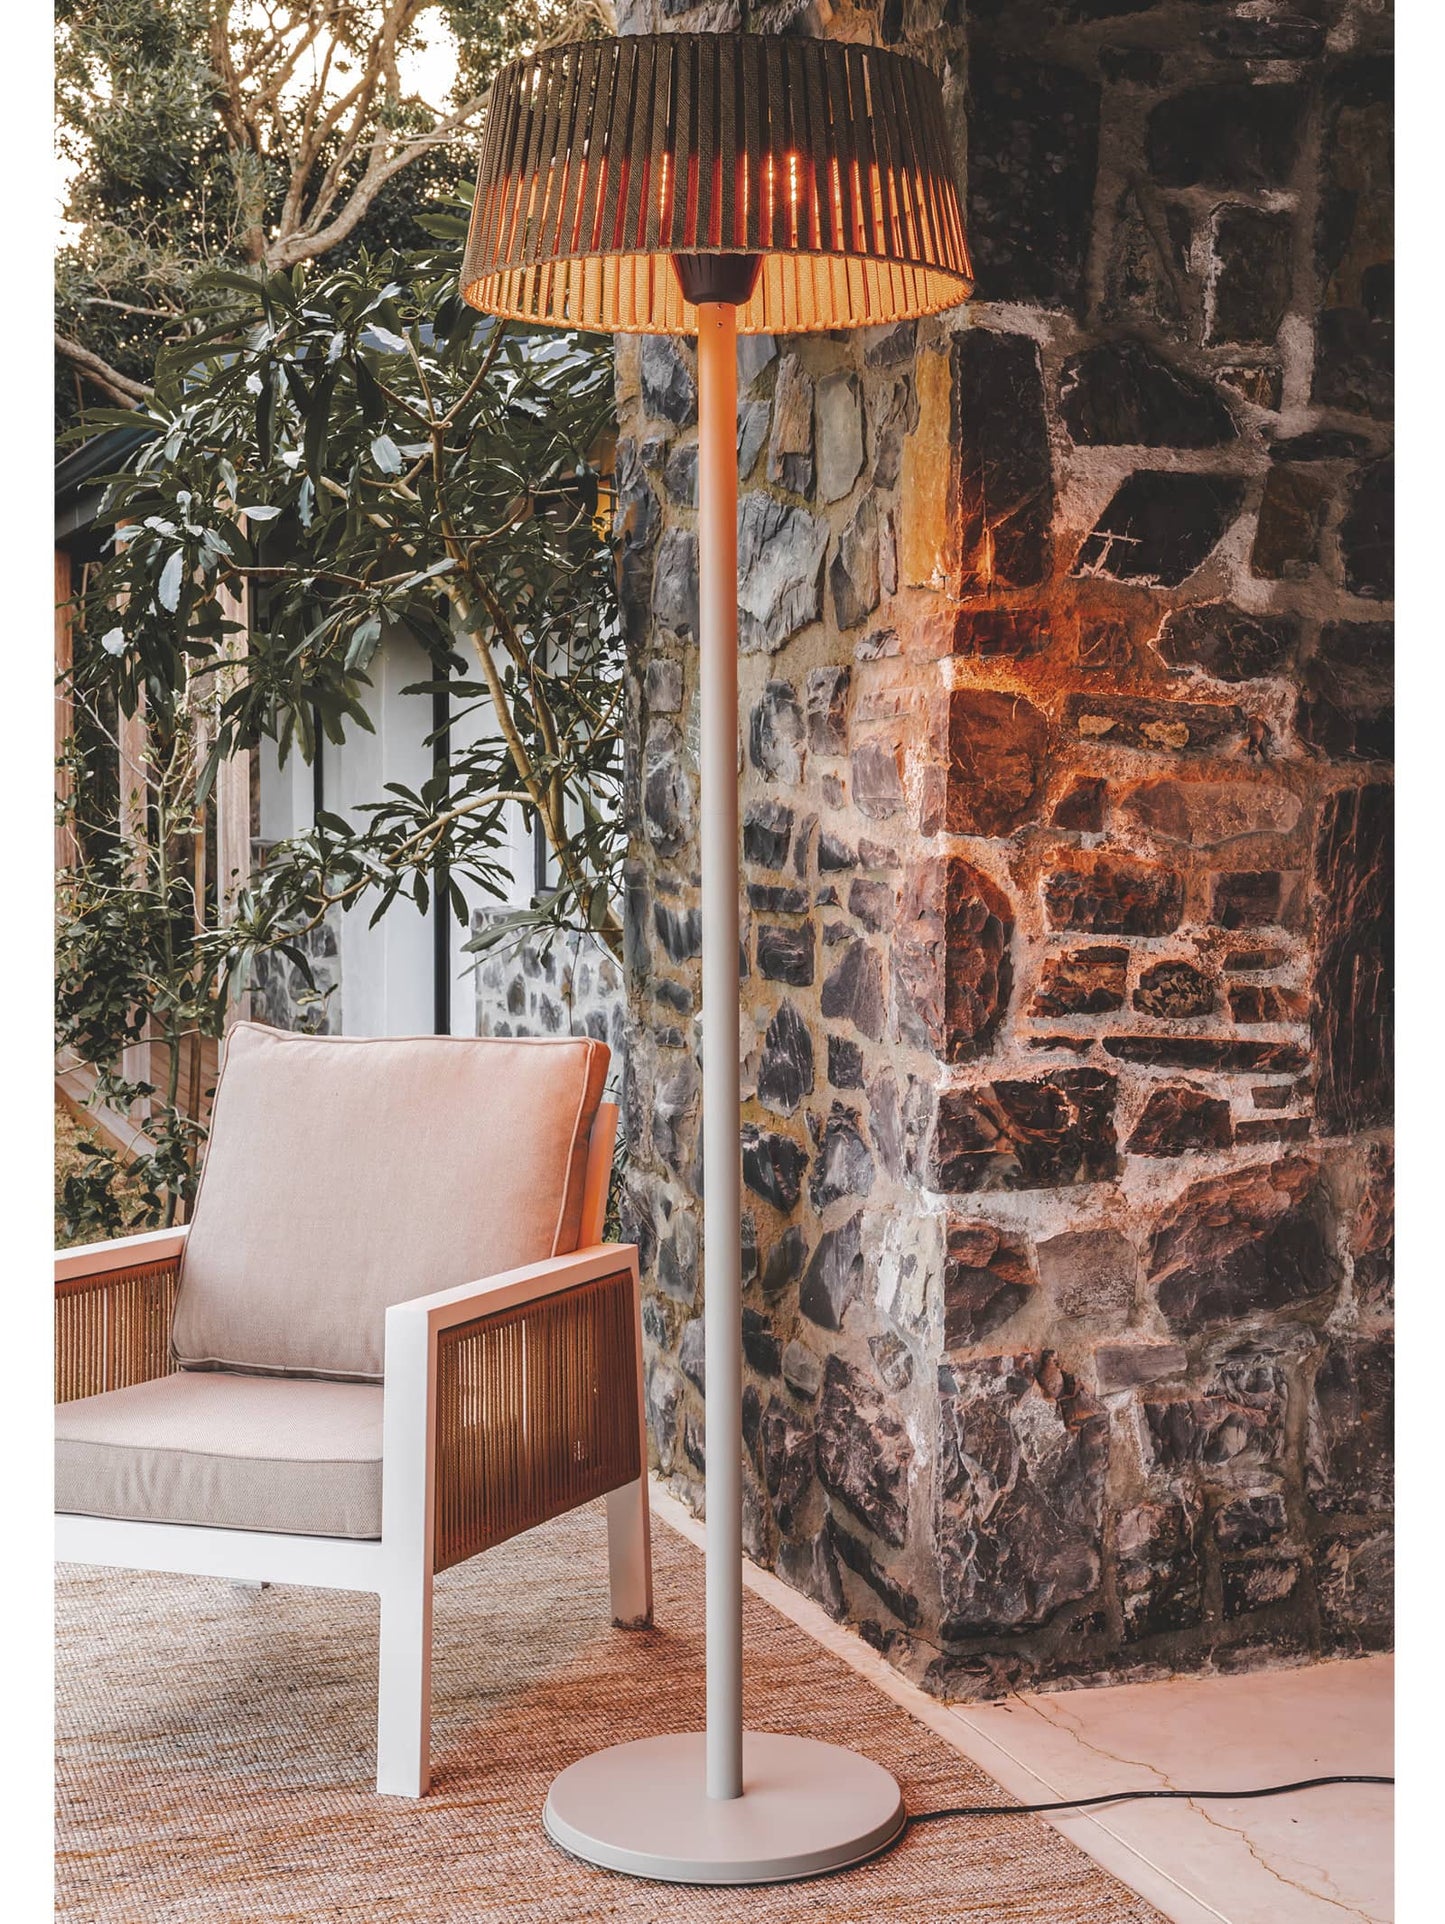 Woodka Interiors Heatwave Patio Heater in Outdoor Setting - Enhance Your Outdoor Experience 